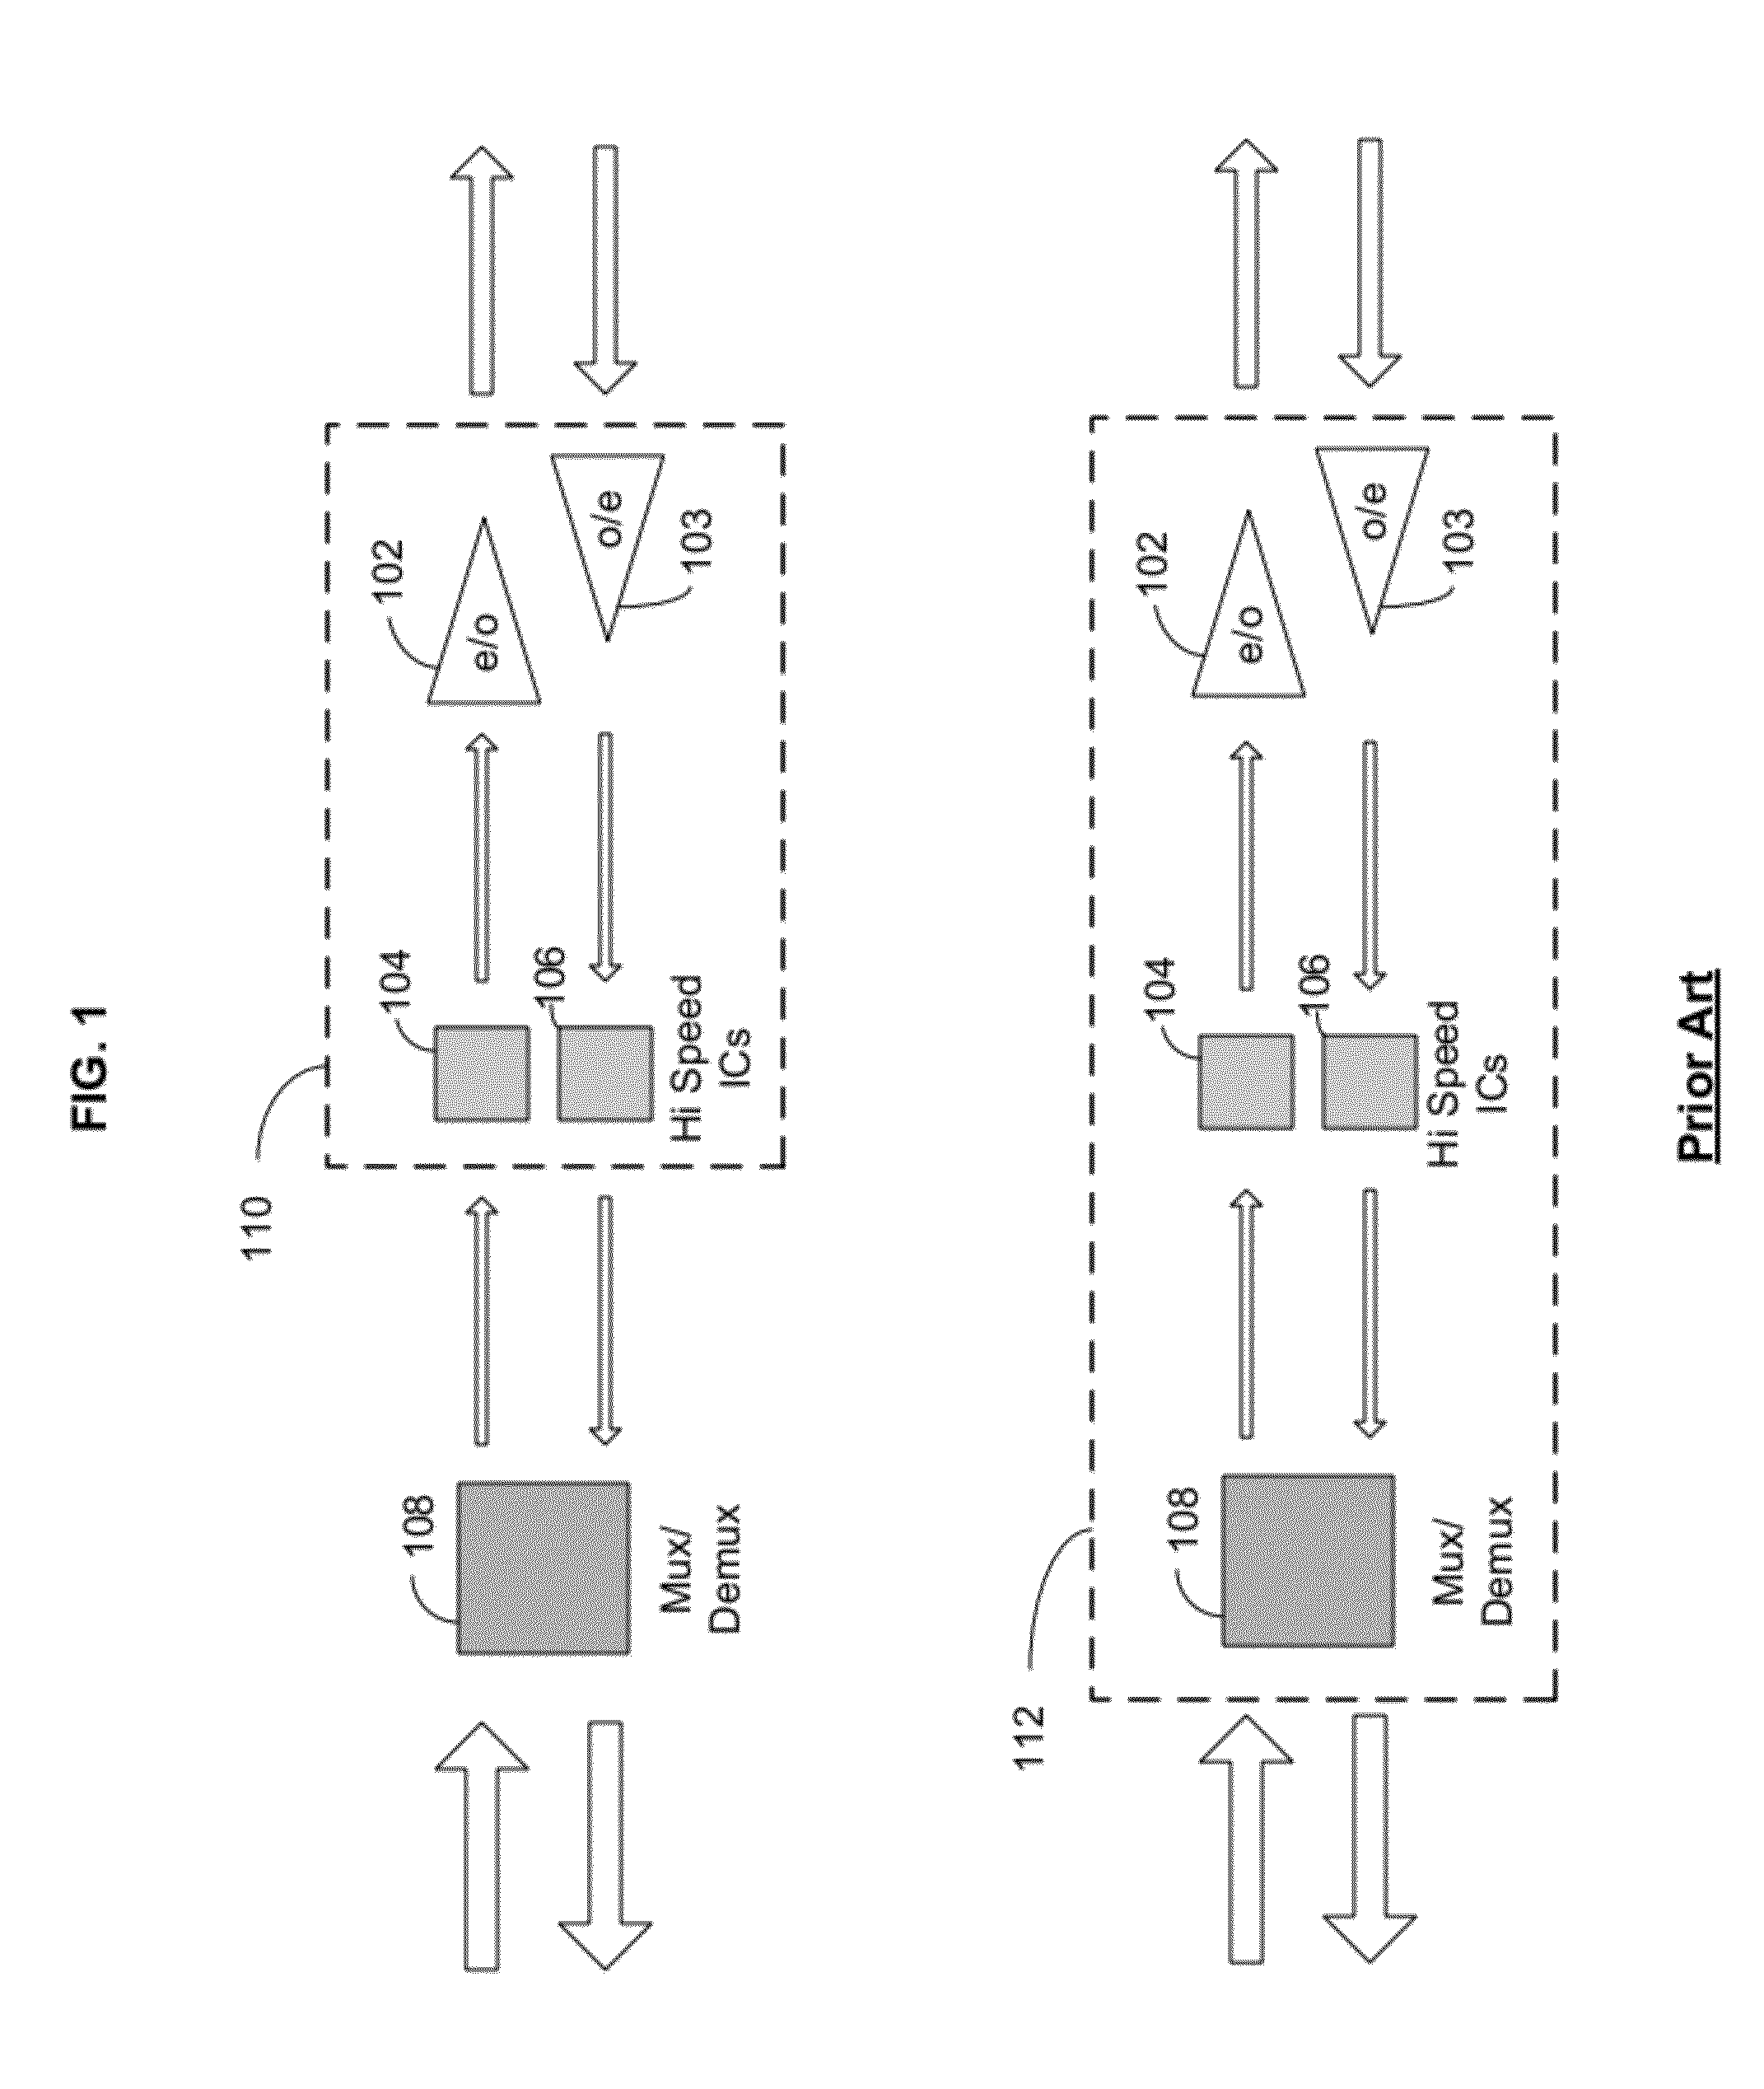 System and Method for Optical Layer Management in Optical Modules and Remote Control of Optical Modules